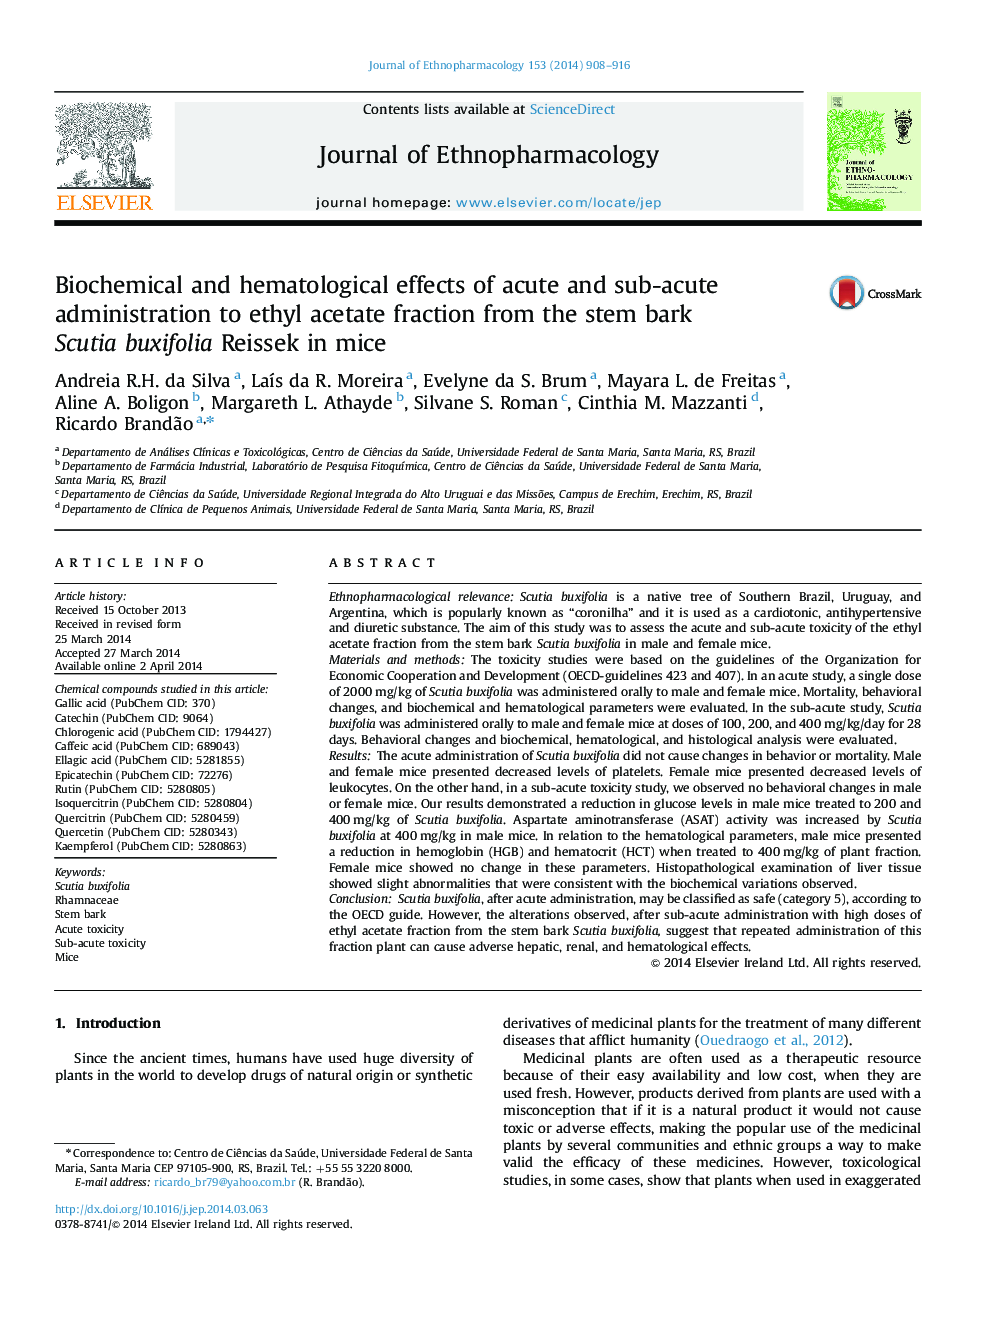 Biochemical and hematological effects of acute and sub-acute administration to ethyl acetate fraction from the stem bark Scutia buxifolia Reissek in mice